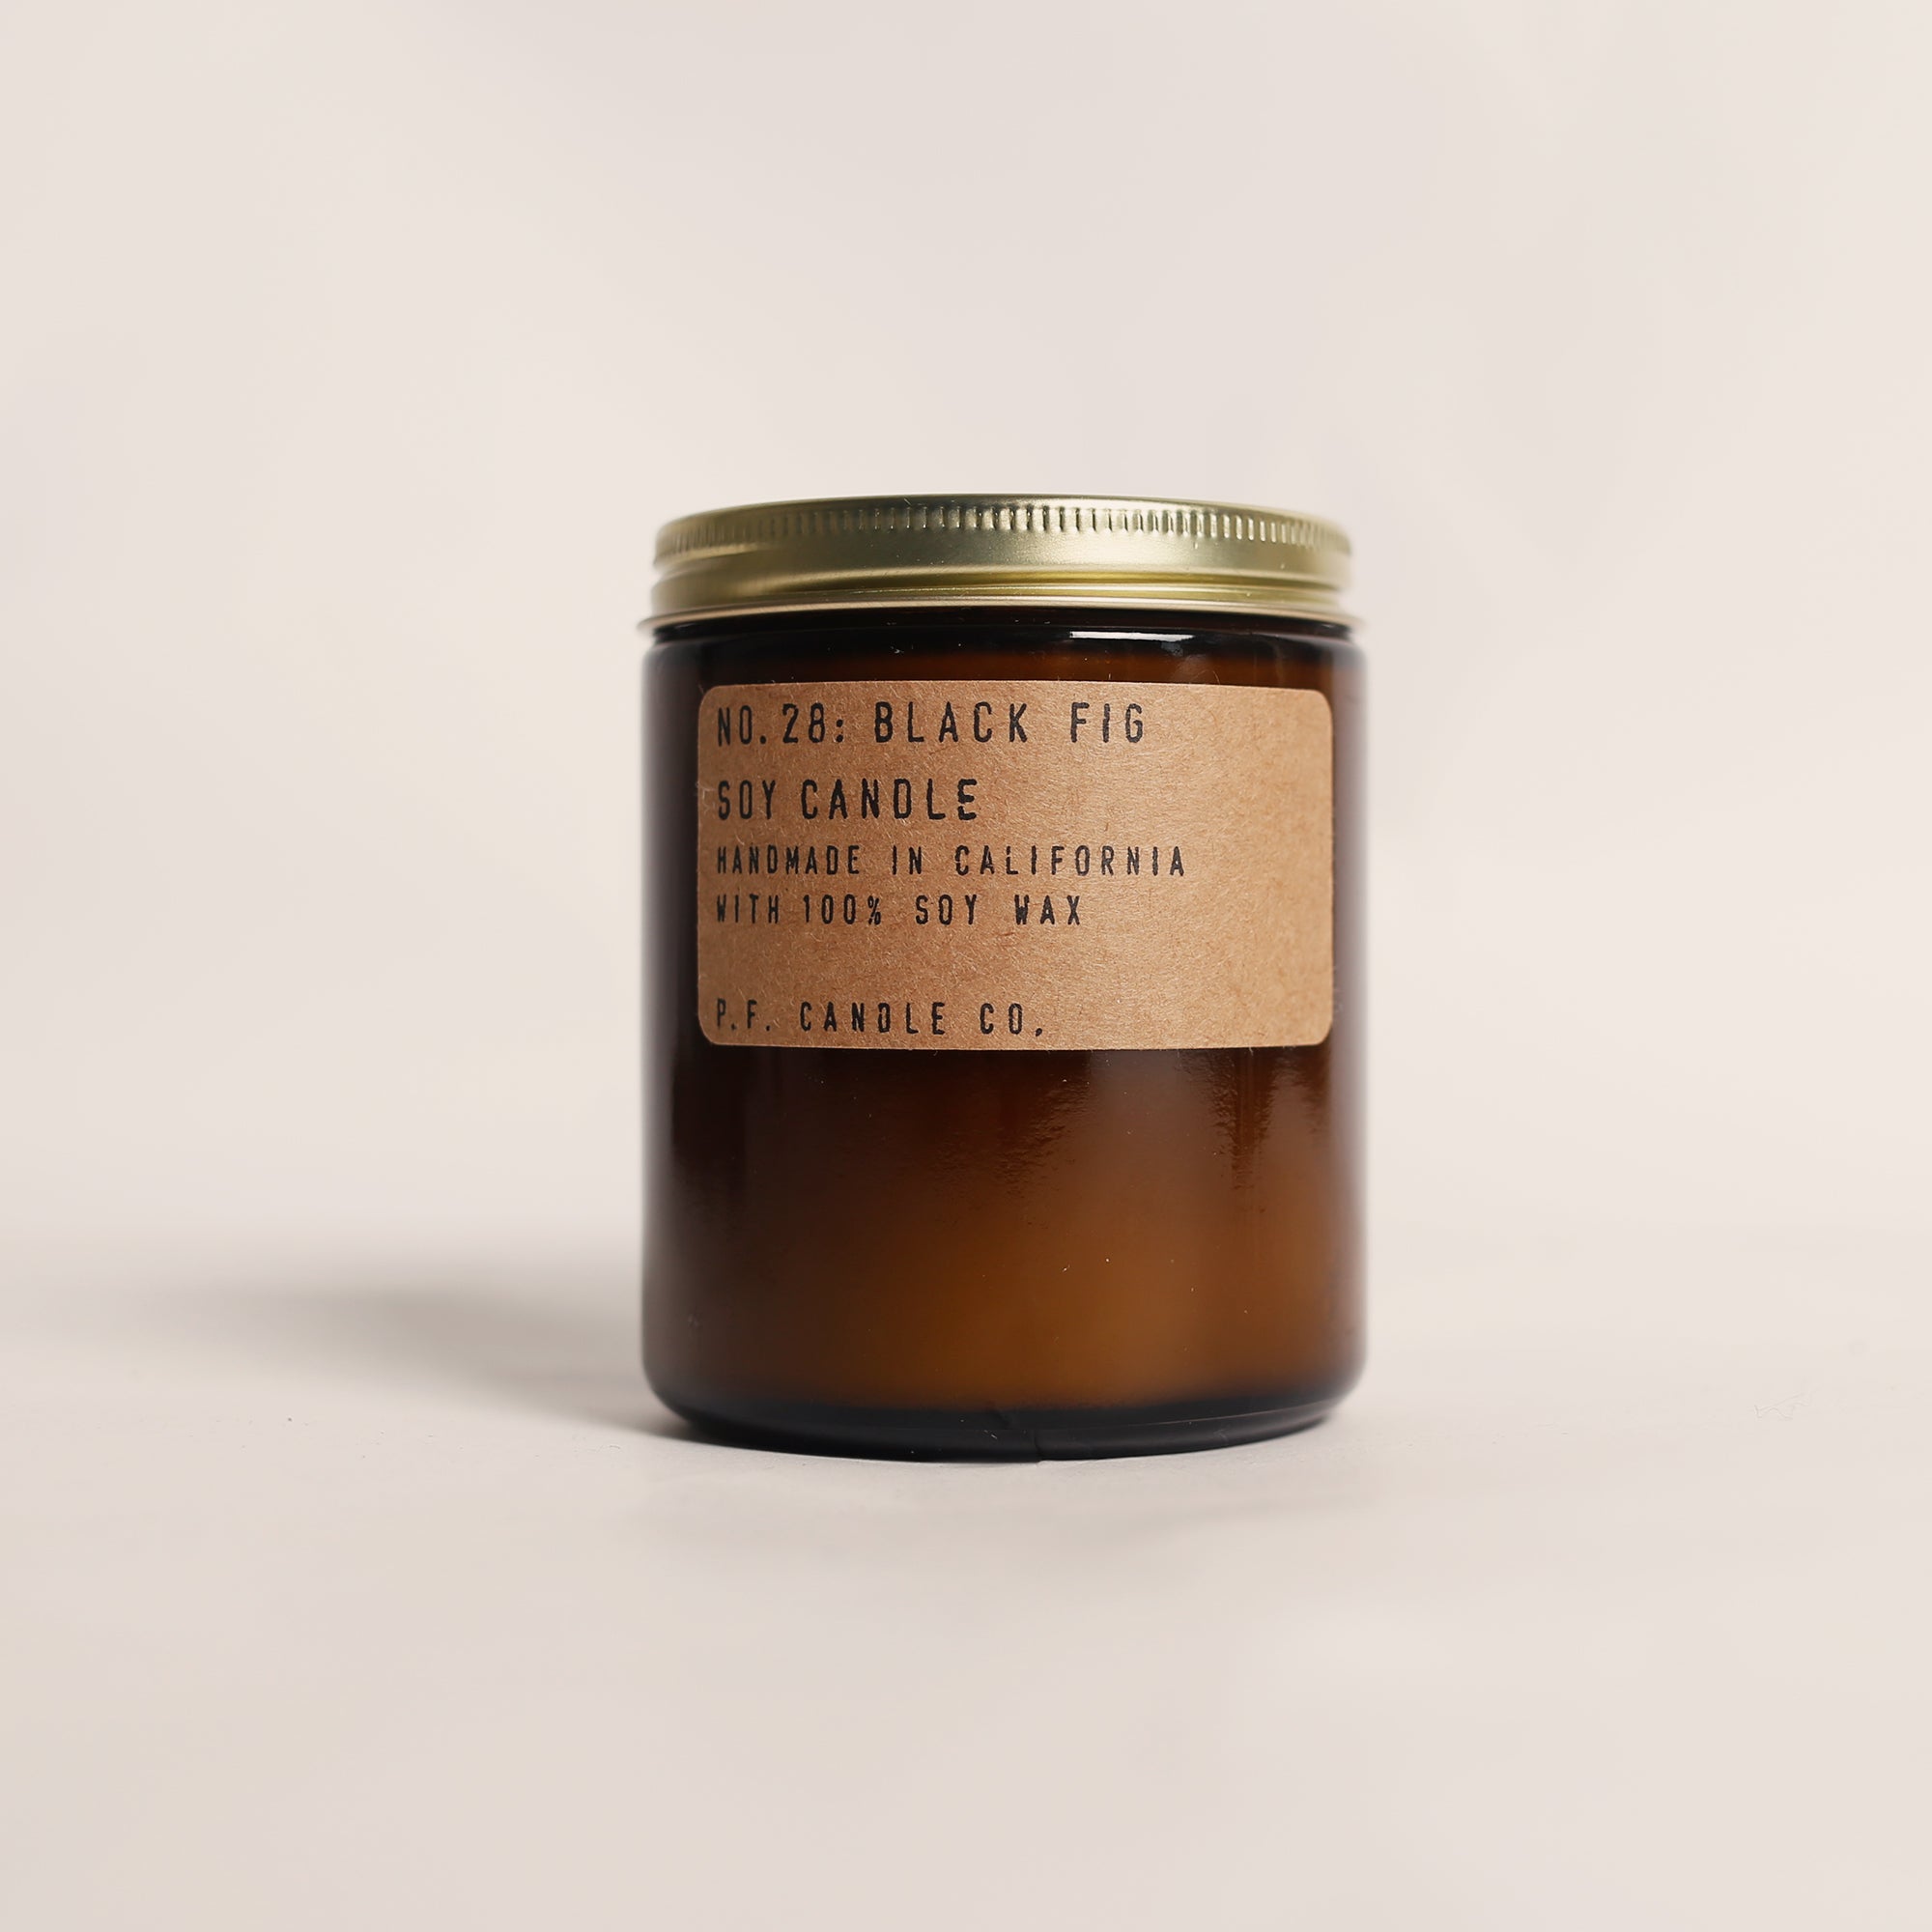 P.F Candle Co. - Candle - Black Fig